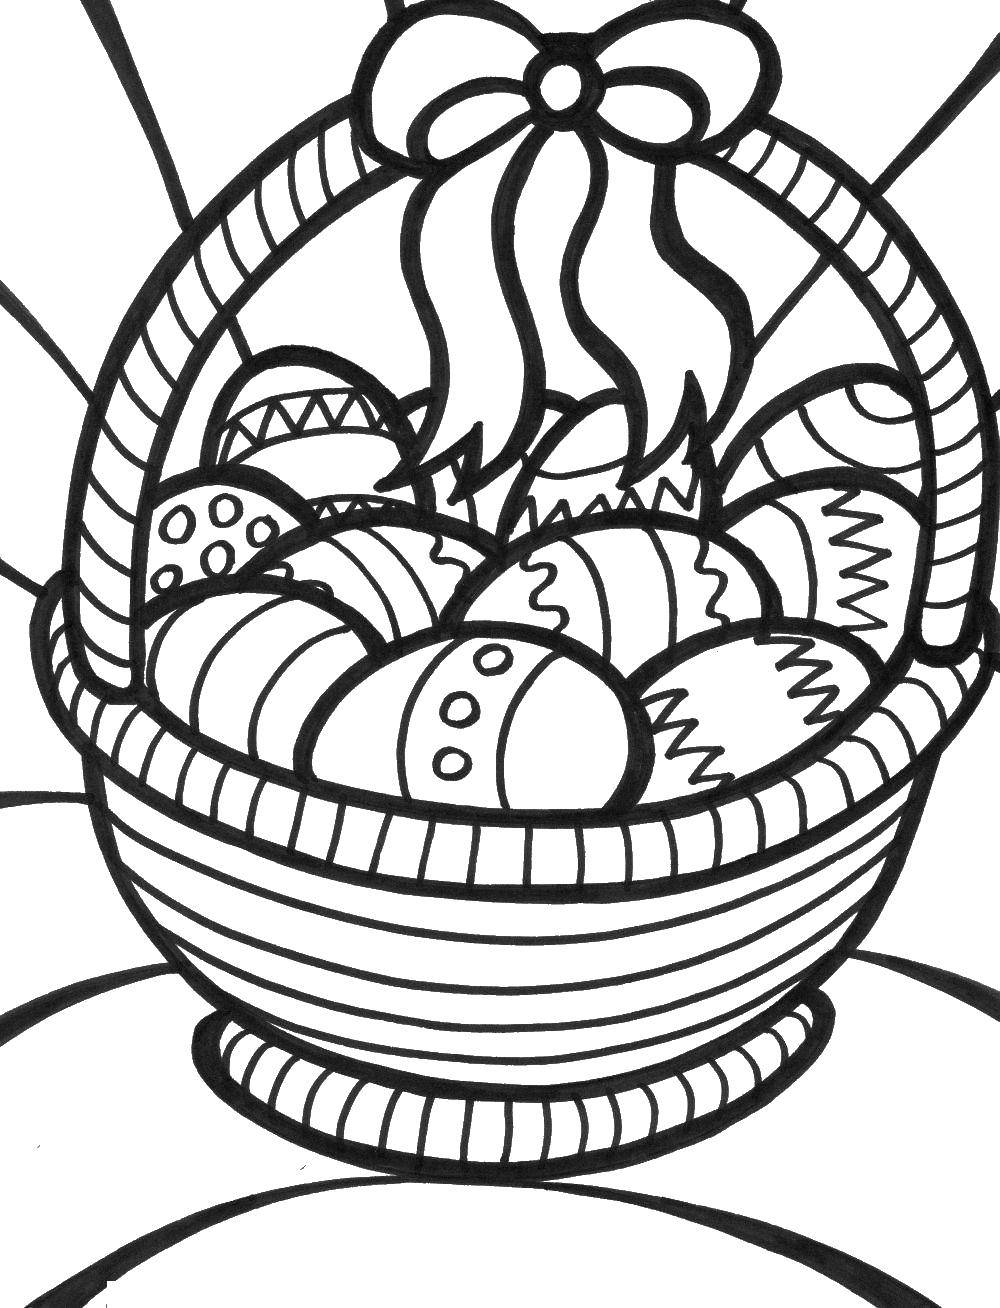 Coloring Basket with Easter eggs. Category Easter. Tags:  Easter, eggs, patterns.